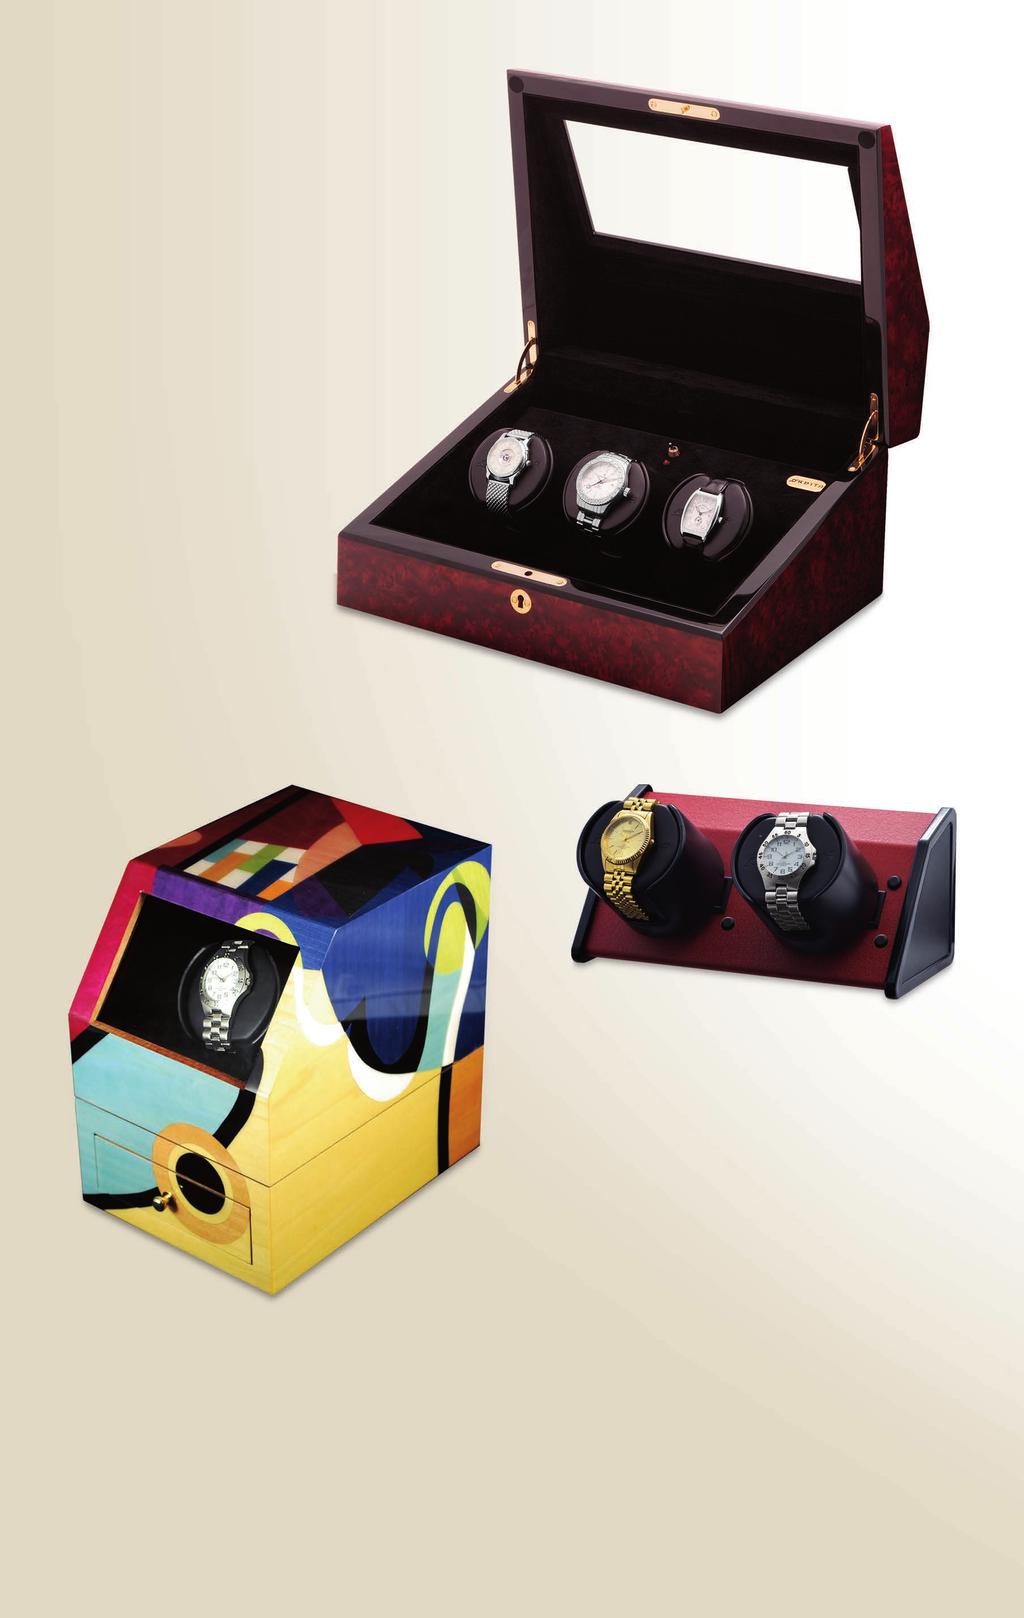 A A. Siena 3 url lassic watch winder with beveled glass viewing panel and superb quadrant hinges, suede lined interior surfaces and lift out rive modules to load optional batteries.